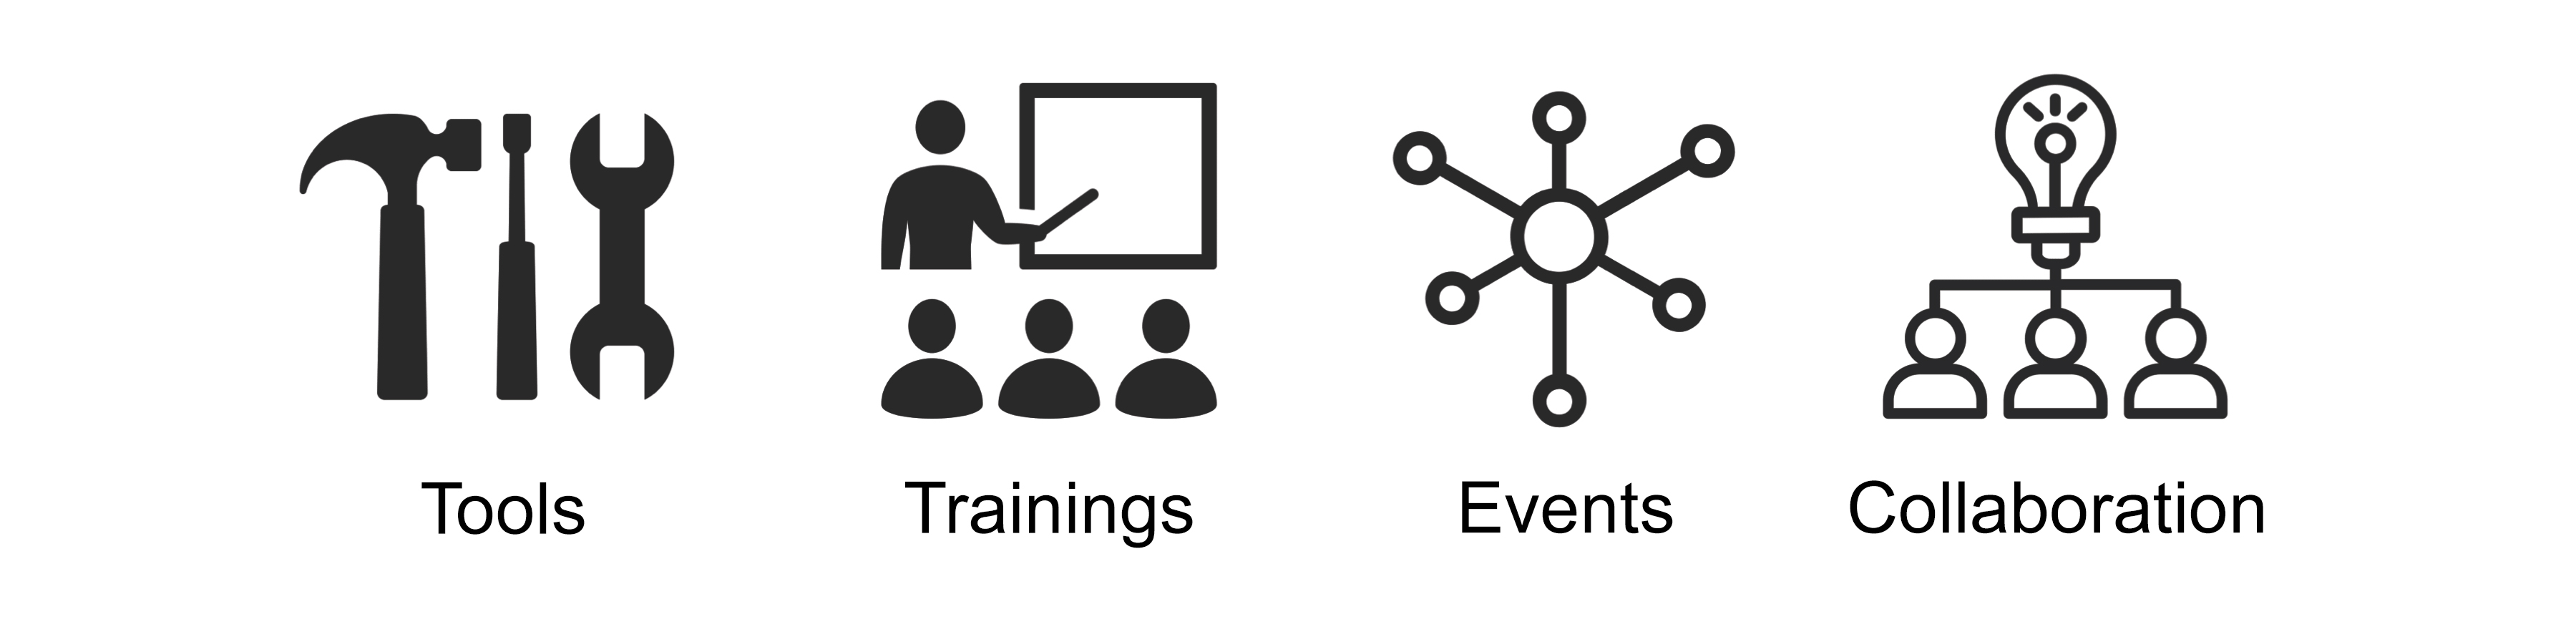 Open Science and Data Collaboration icons